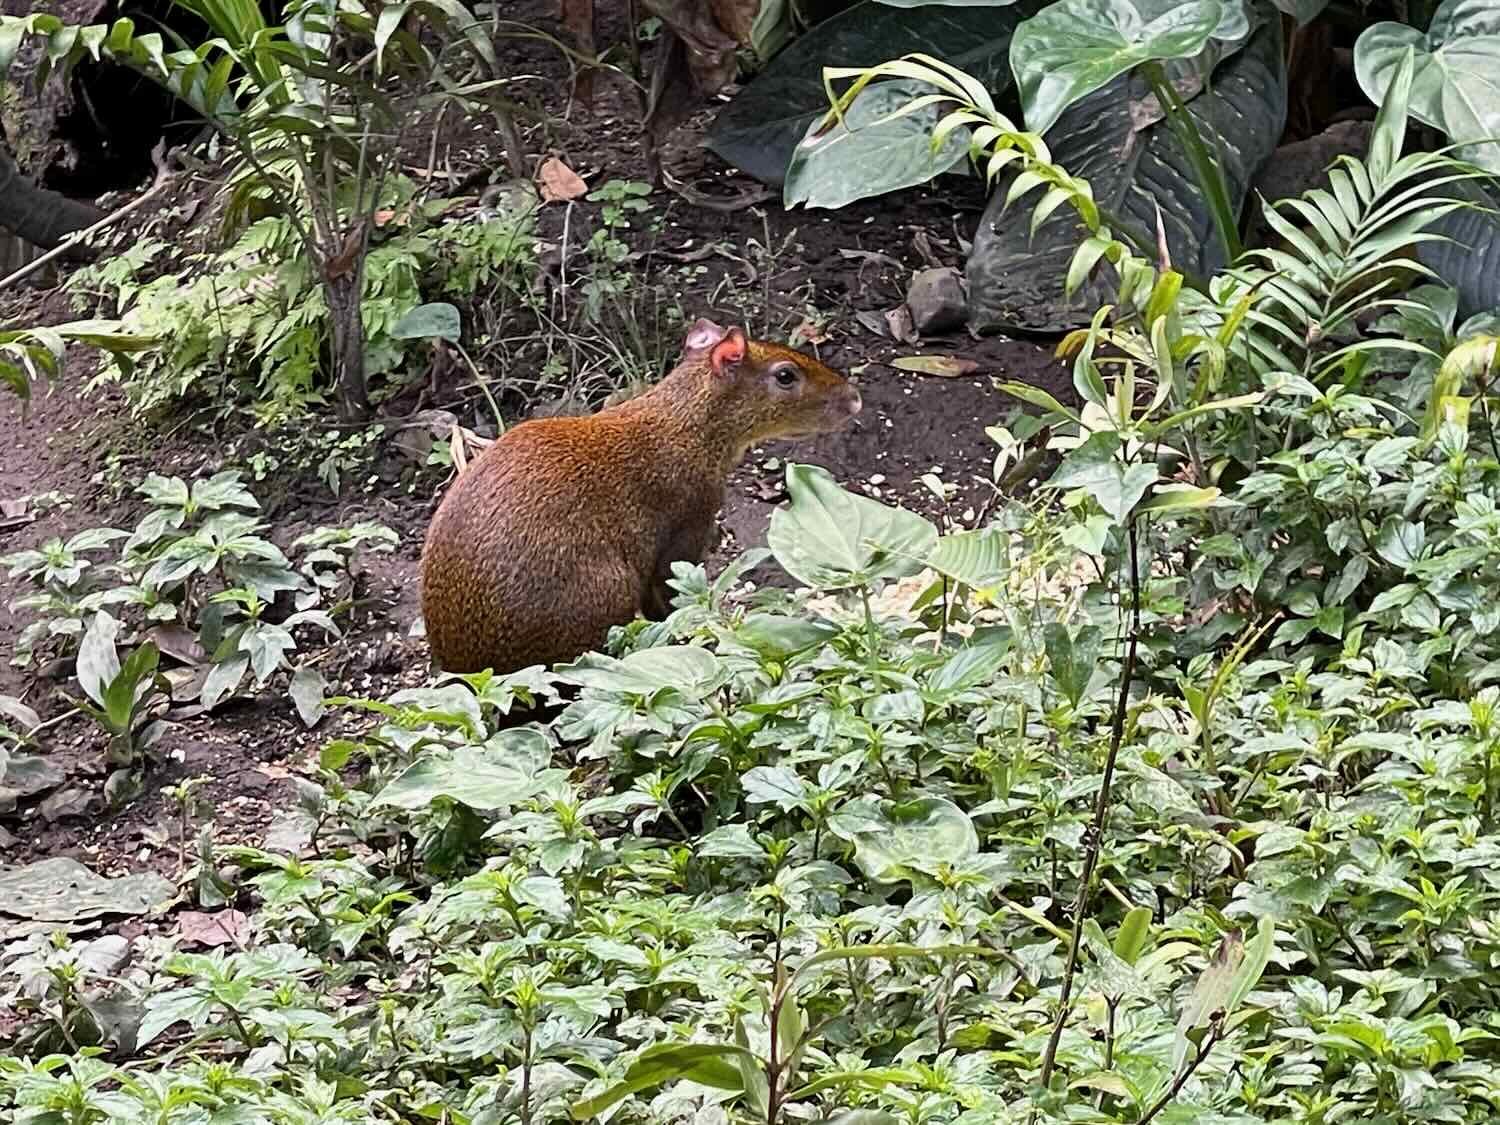 This Central American agouti preferred the shade